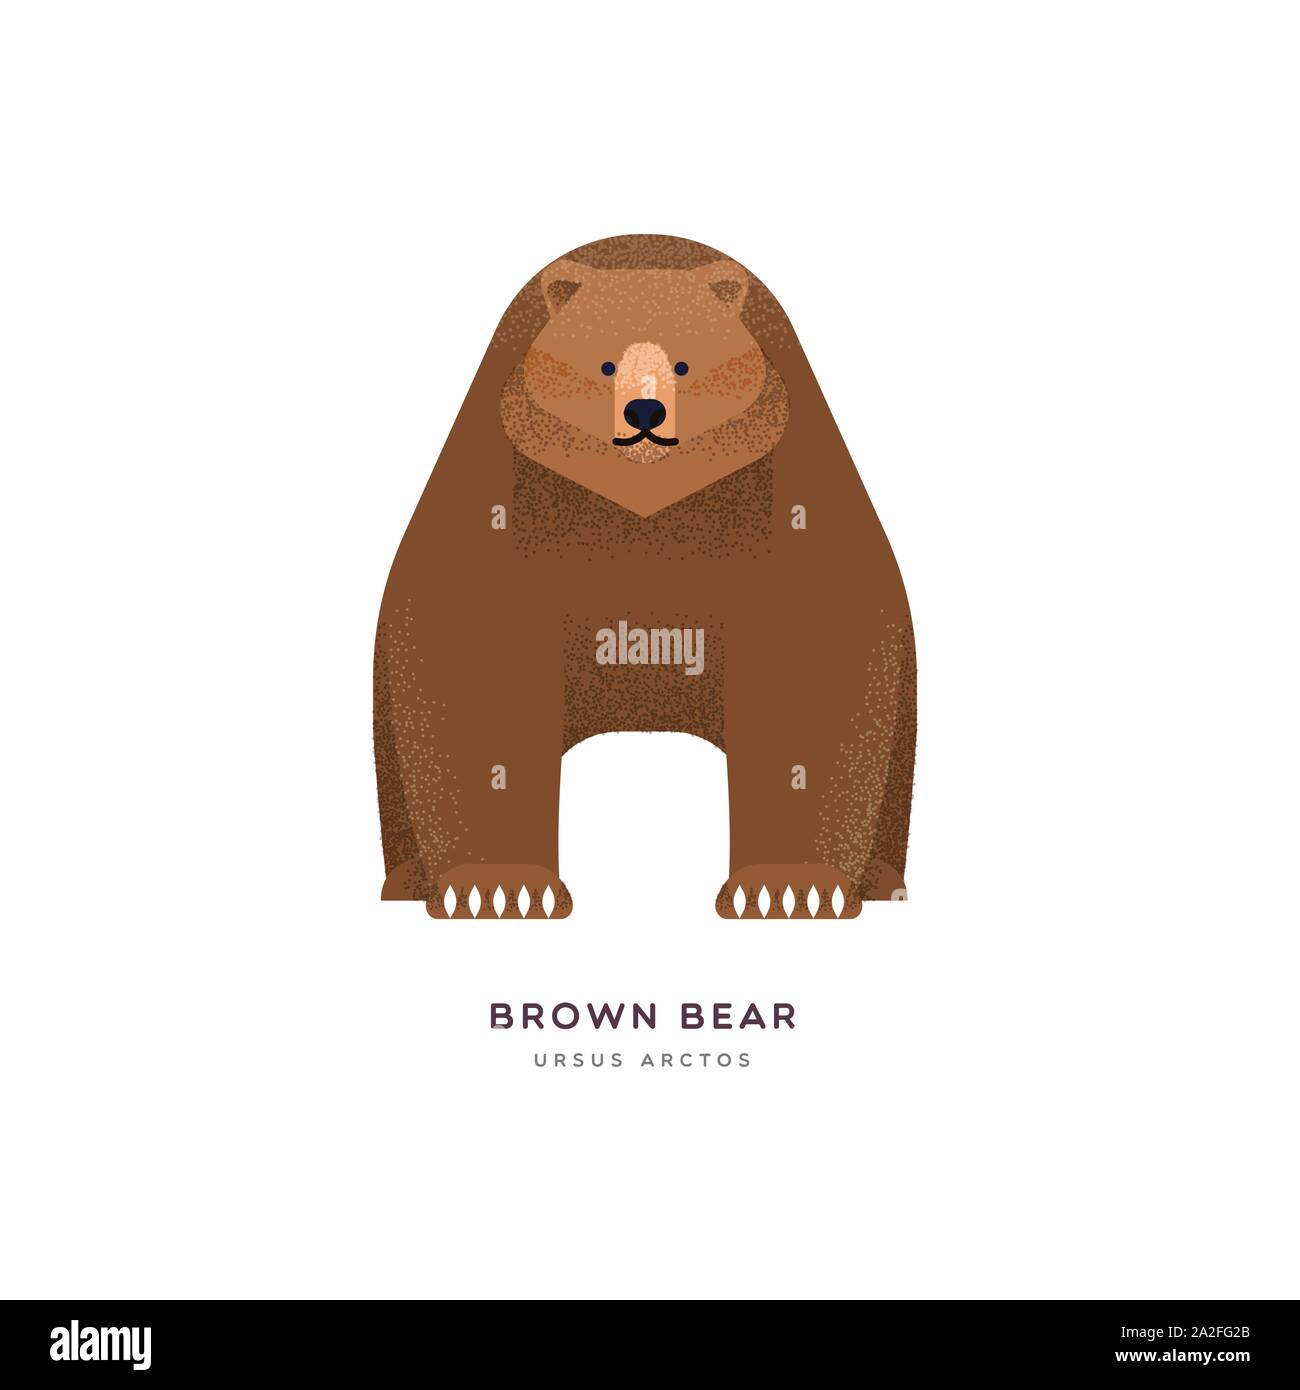 Brown bear animal illustration on isolated white background. Educational wildlife design with fauna species name label. Stock Vector